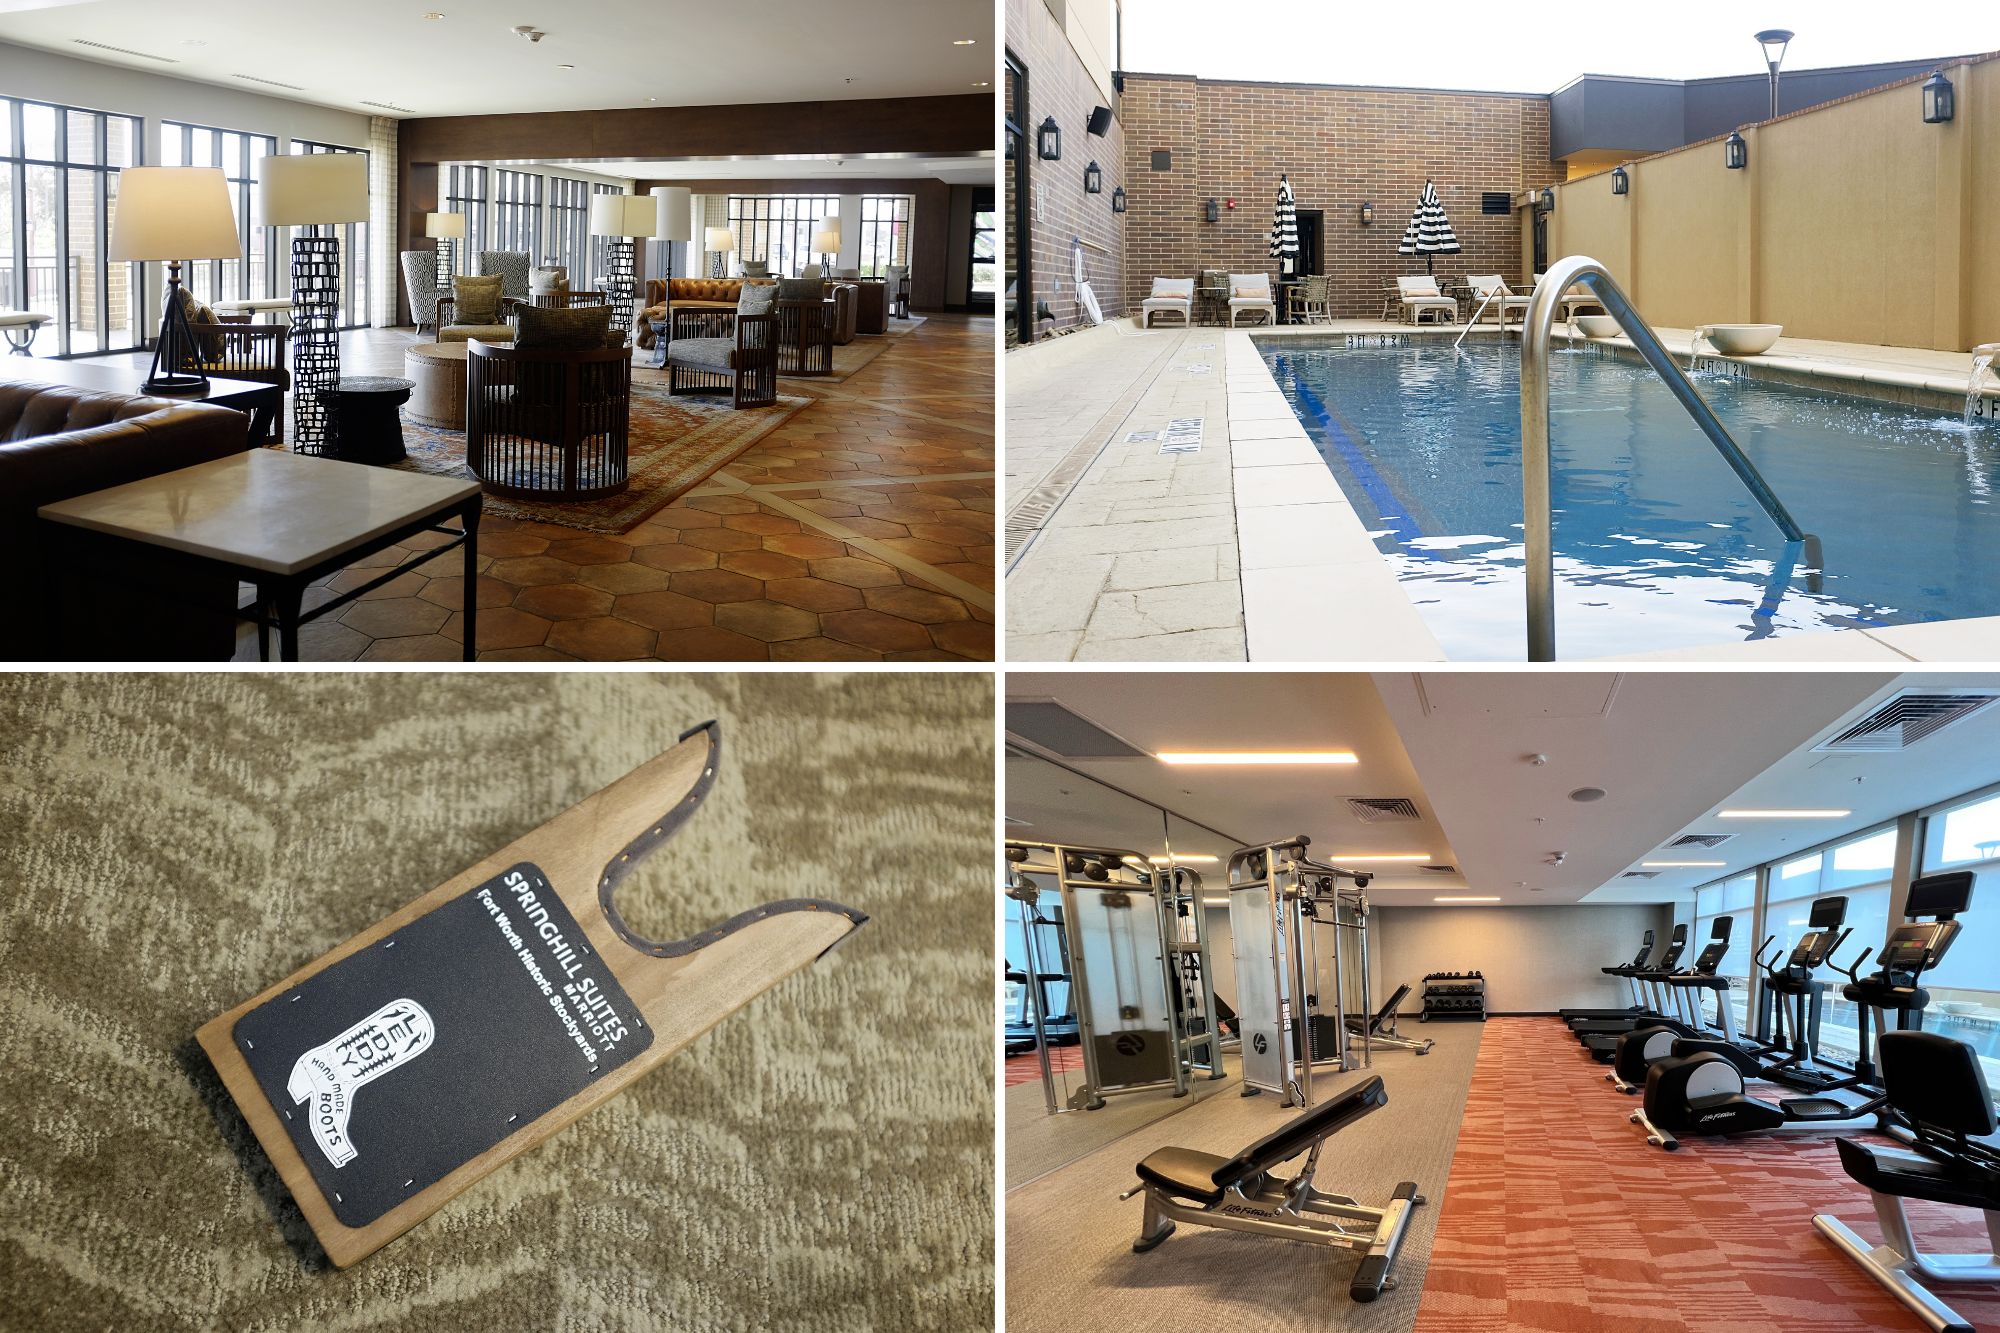 The hotel lobby, pool, and fitness center